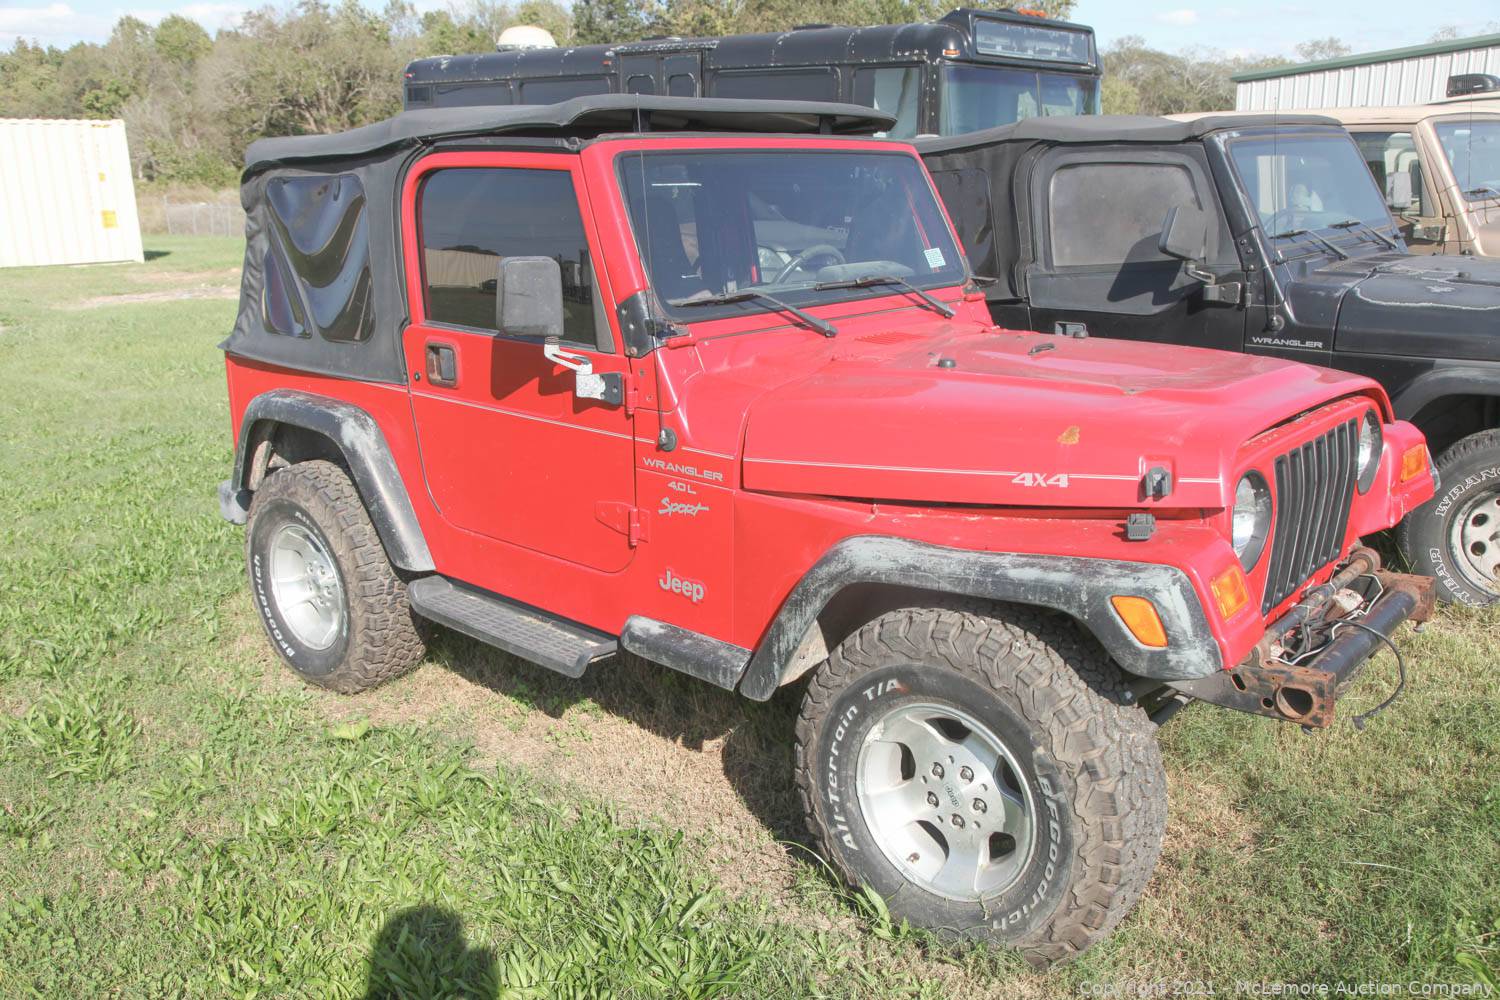 McLemore Auction Company - Auction: Four Classic Jeeps Including a 1990  Custom Wrangler with LS Swap ITEM: 2000 Red Jeep Wrangler S 4WD  V6 VIN  1J4FA9S3YP759306 - BILL OF SALE ONLY